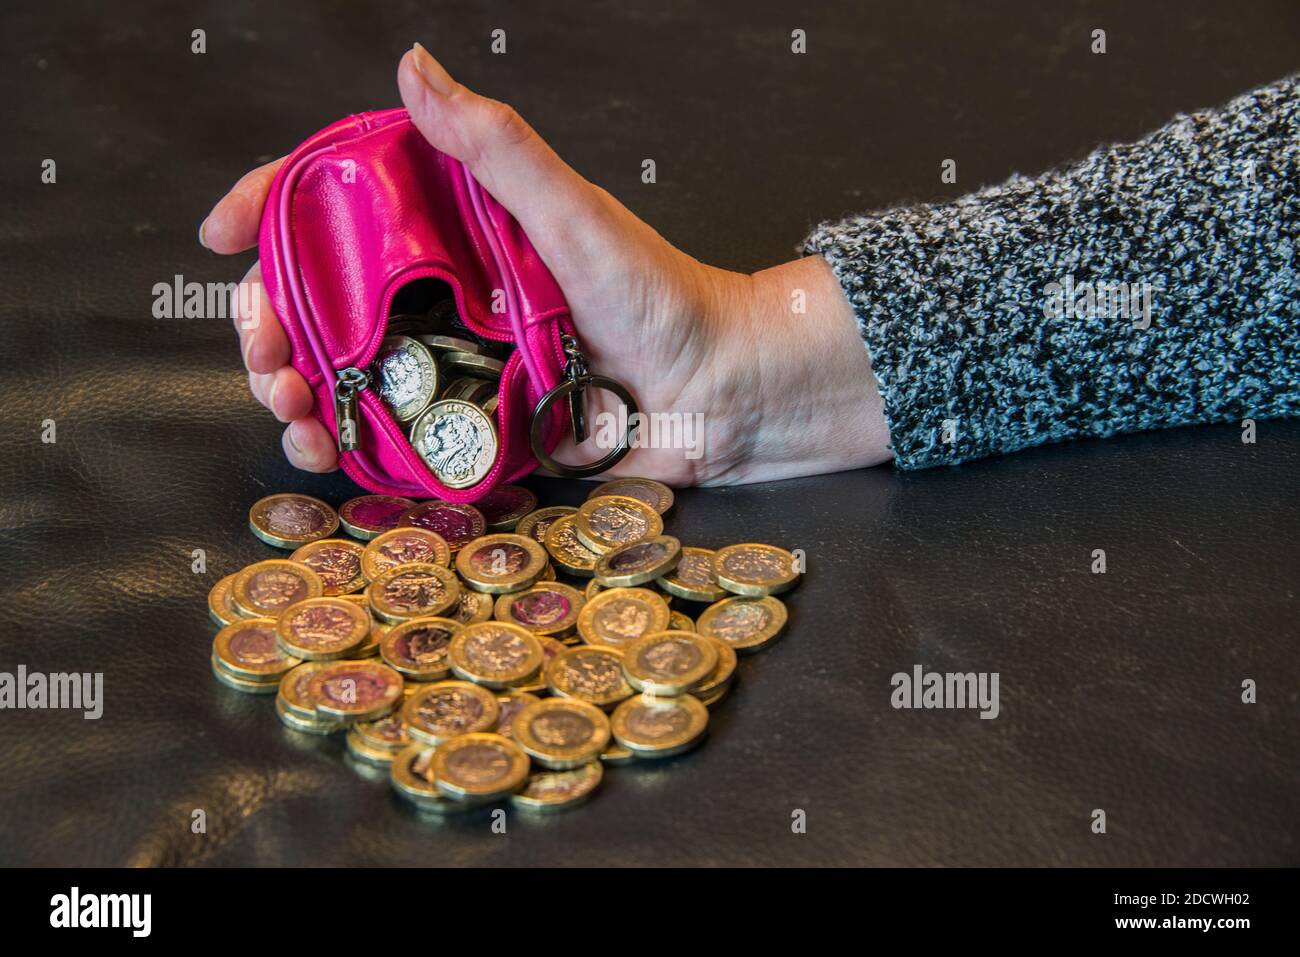 A purse full of £1 coins. Stock Photo